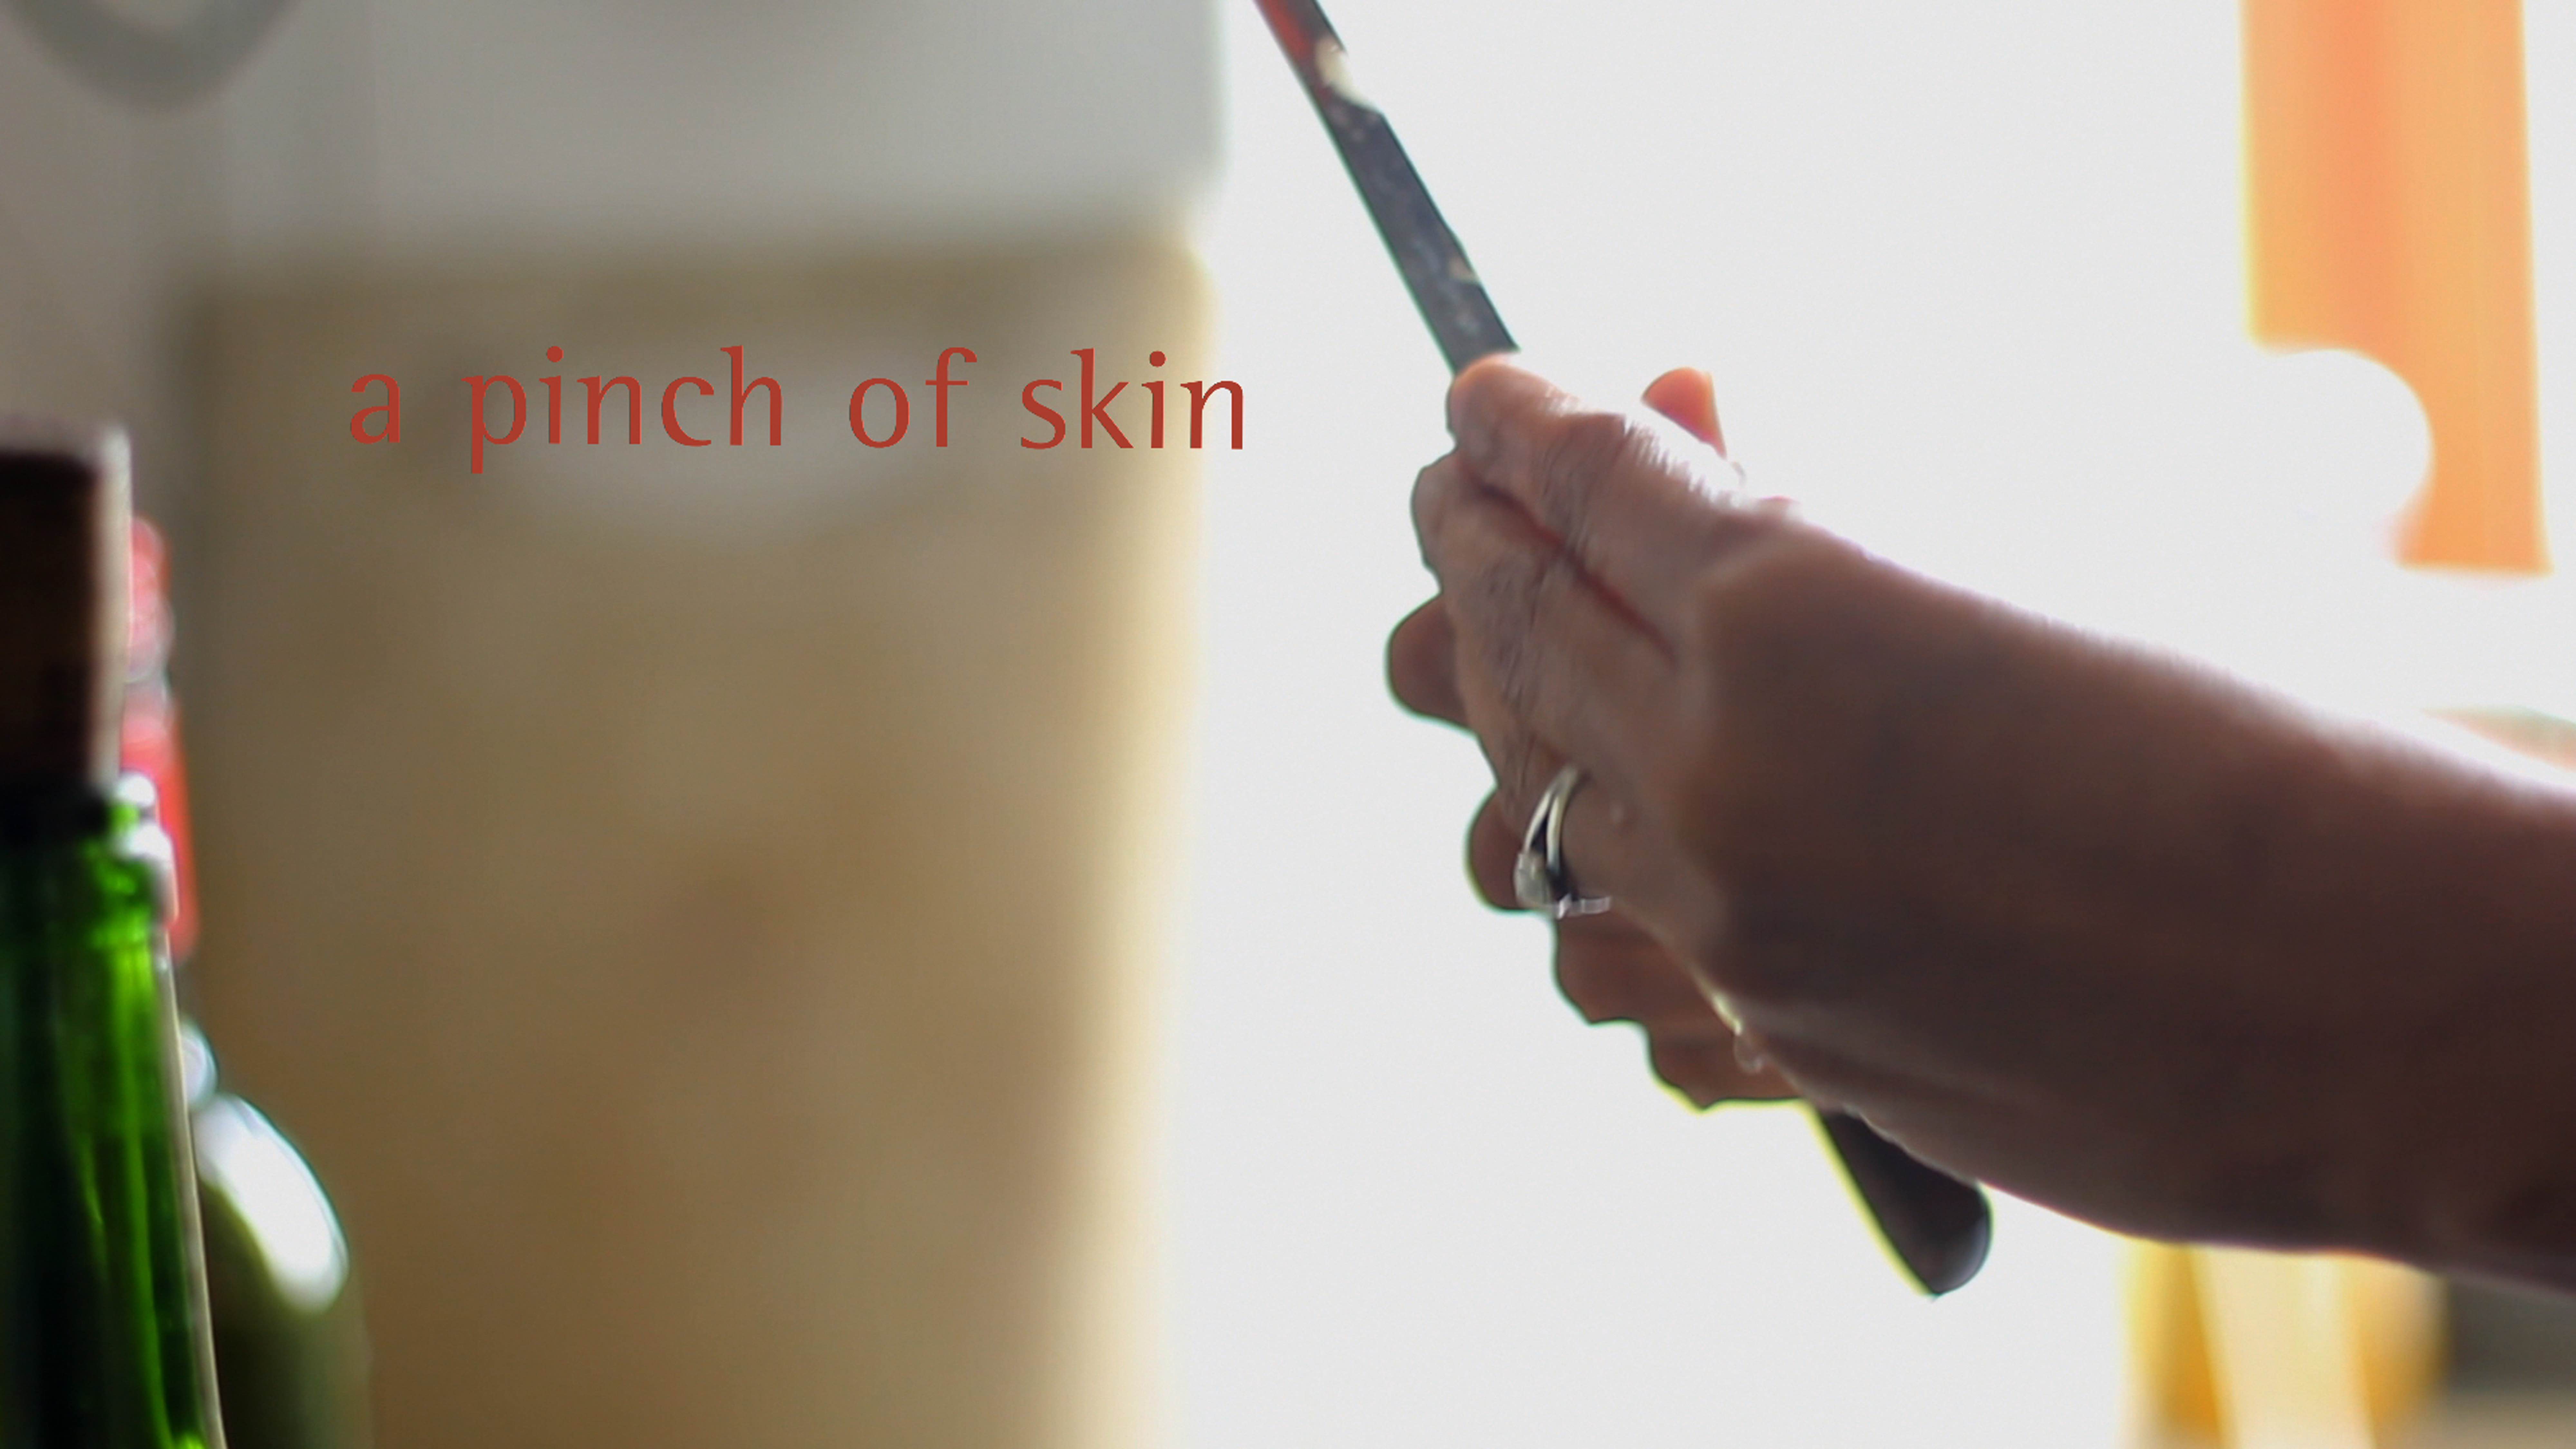 Documentary 'A Pinch of Skin' highlights FGC in India